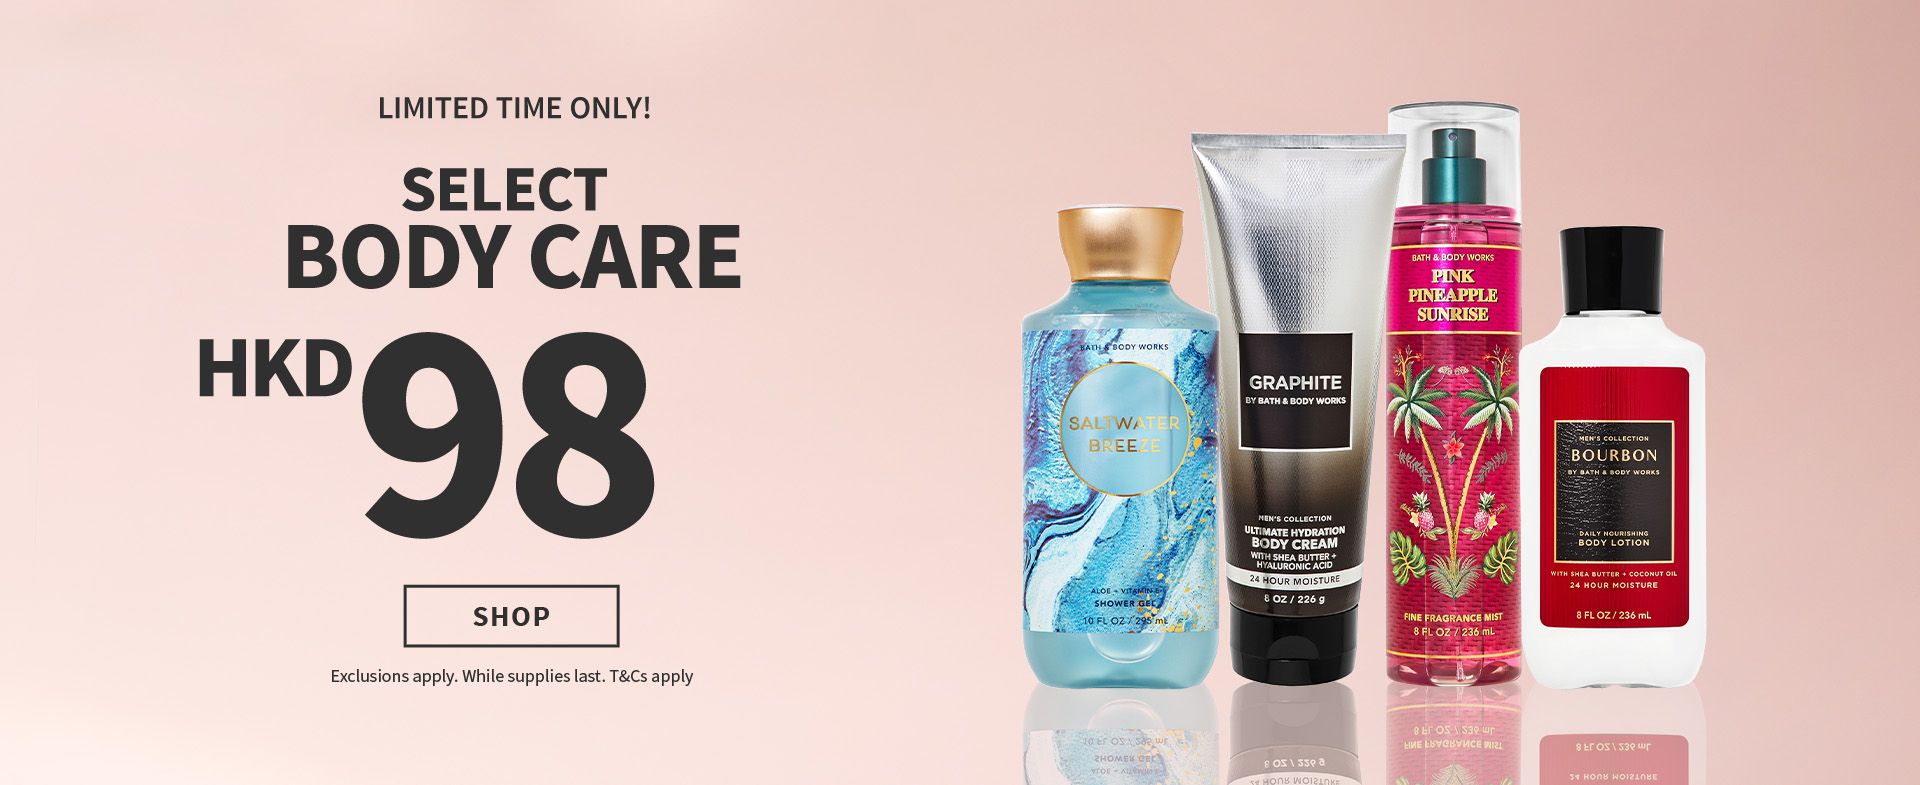 LIMITED TIME ONLY! SELECT BODY CARE